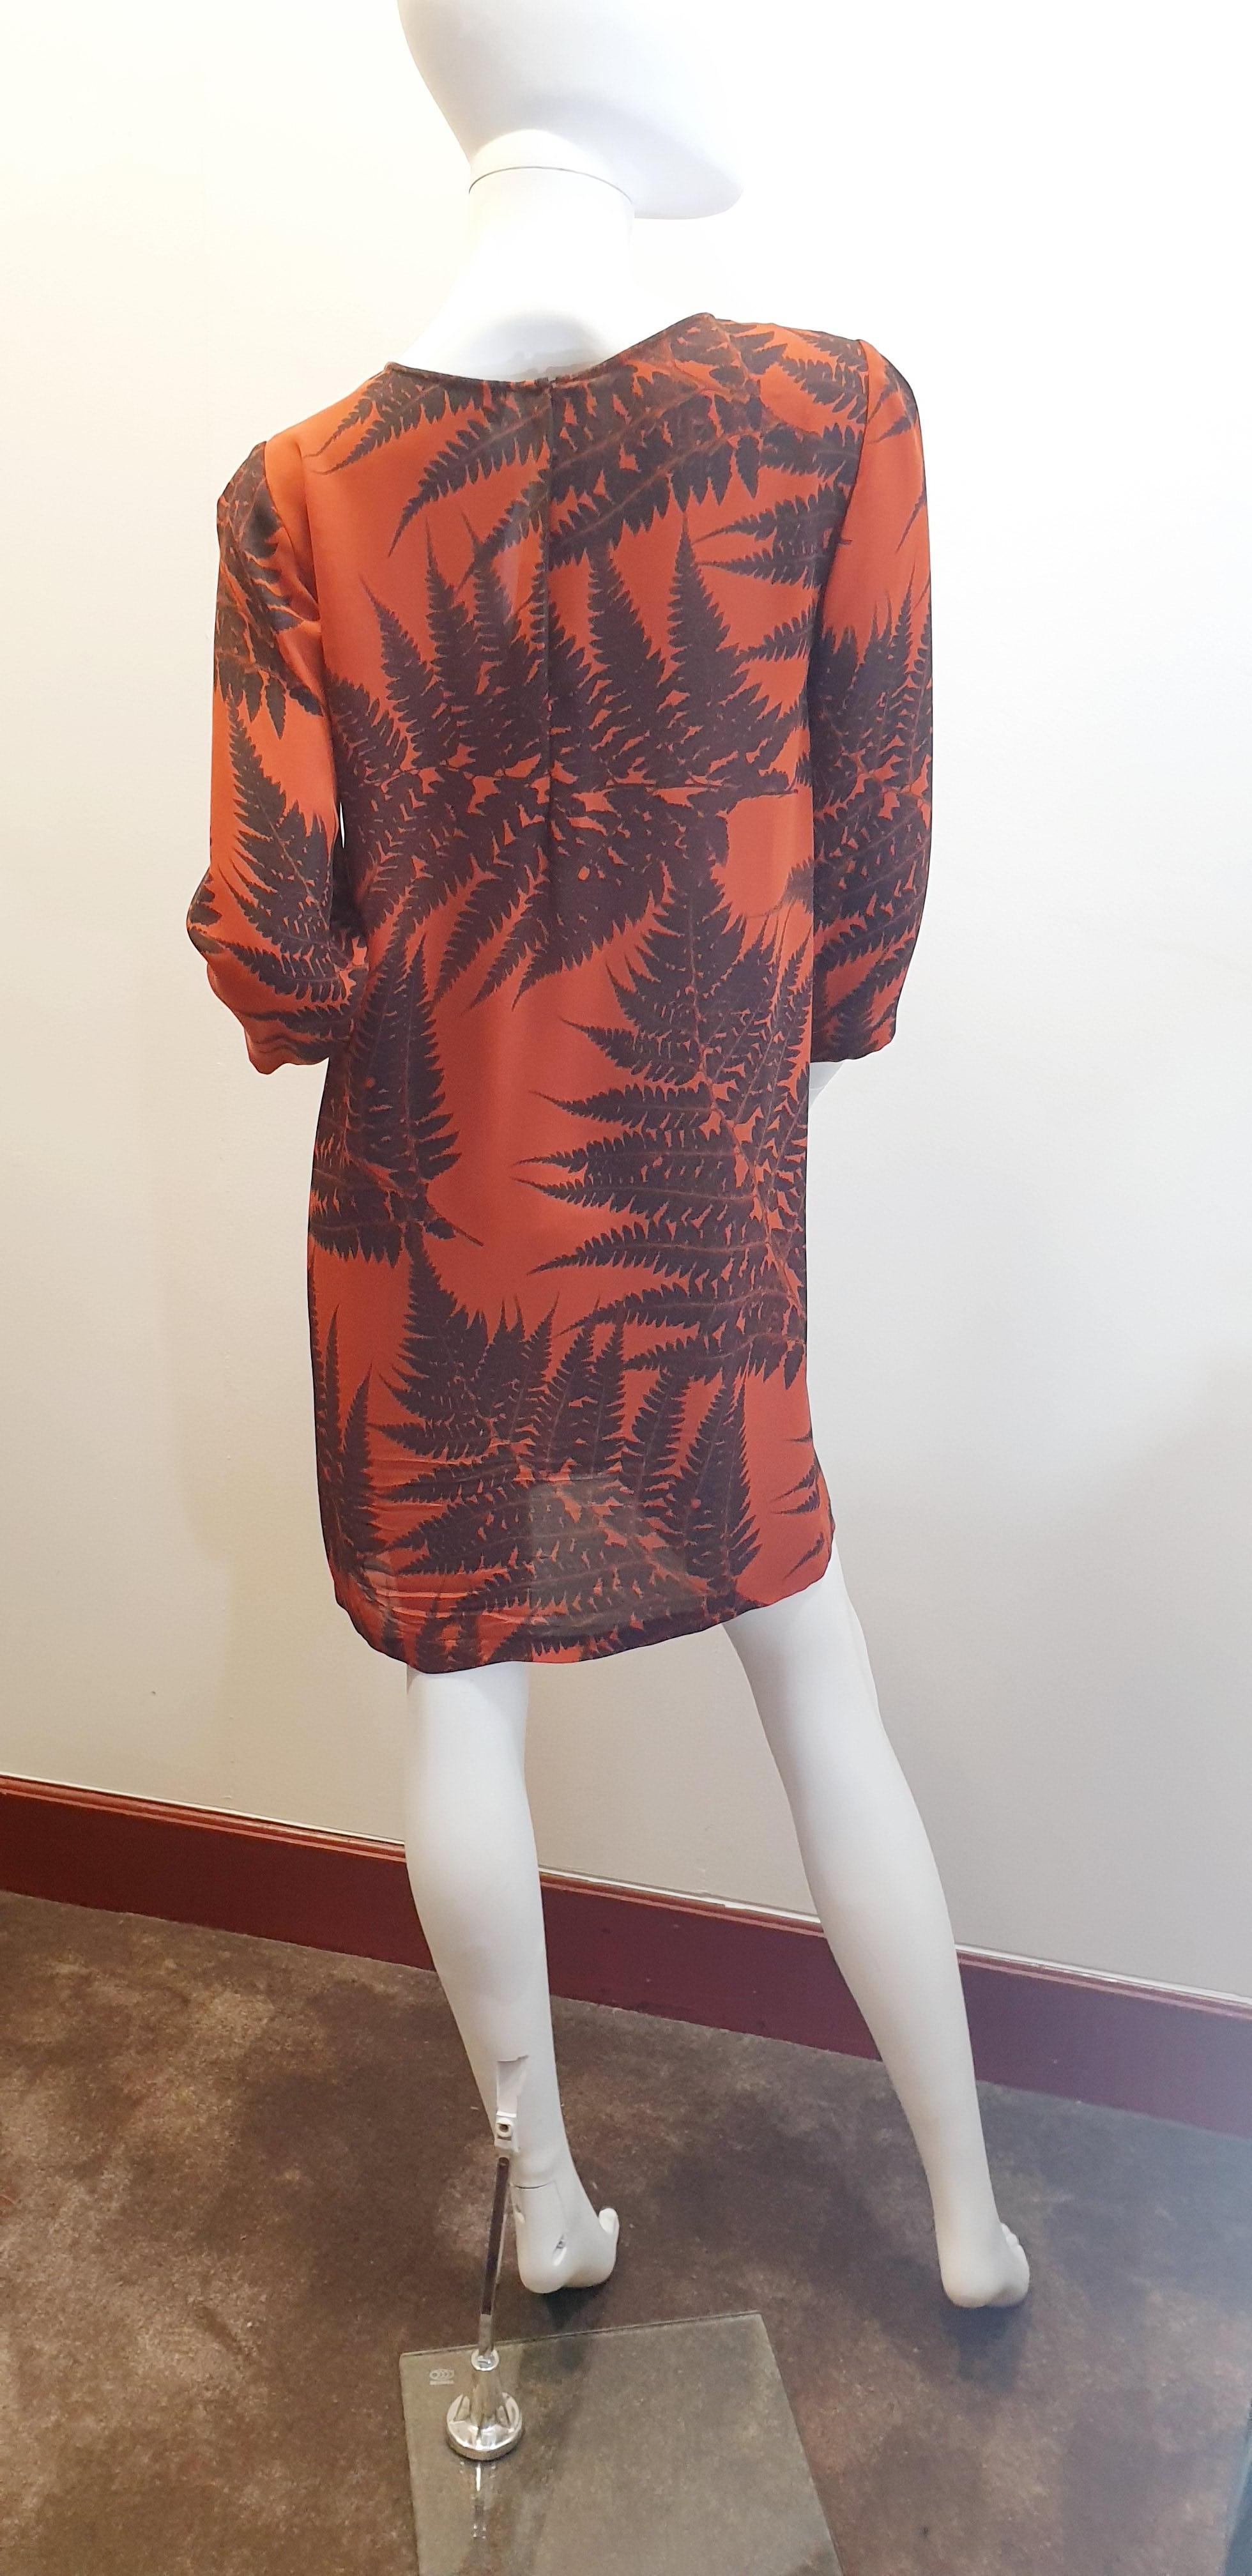 Stella McCartney silk tropical plant cocktail dress in Orange and marron colours
Perfect Condition  Double Linen
Size 40 Europe 8 US
READY TO SHIP
*Shipment of this piece is not affected by COVID-19. Orders welcome!*

Pradera Fashion Division  is